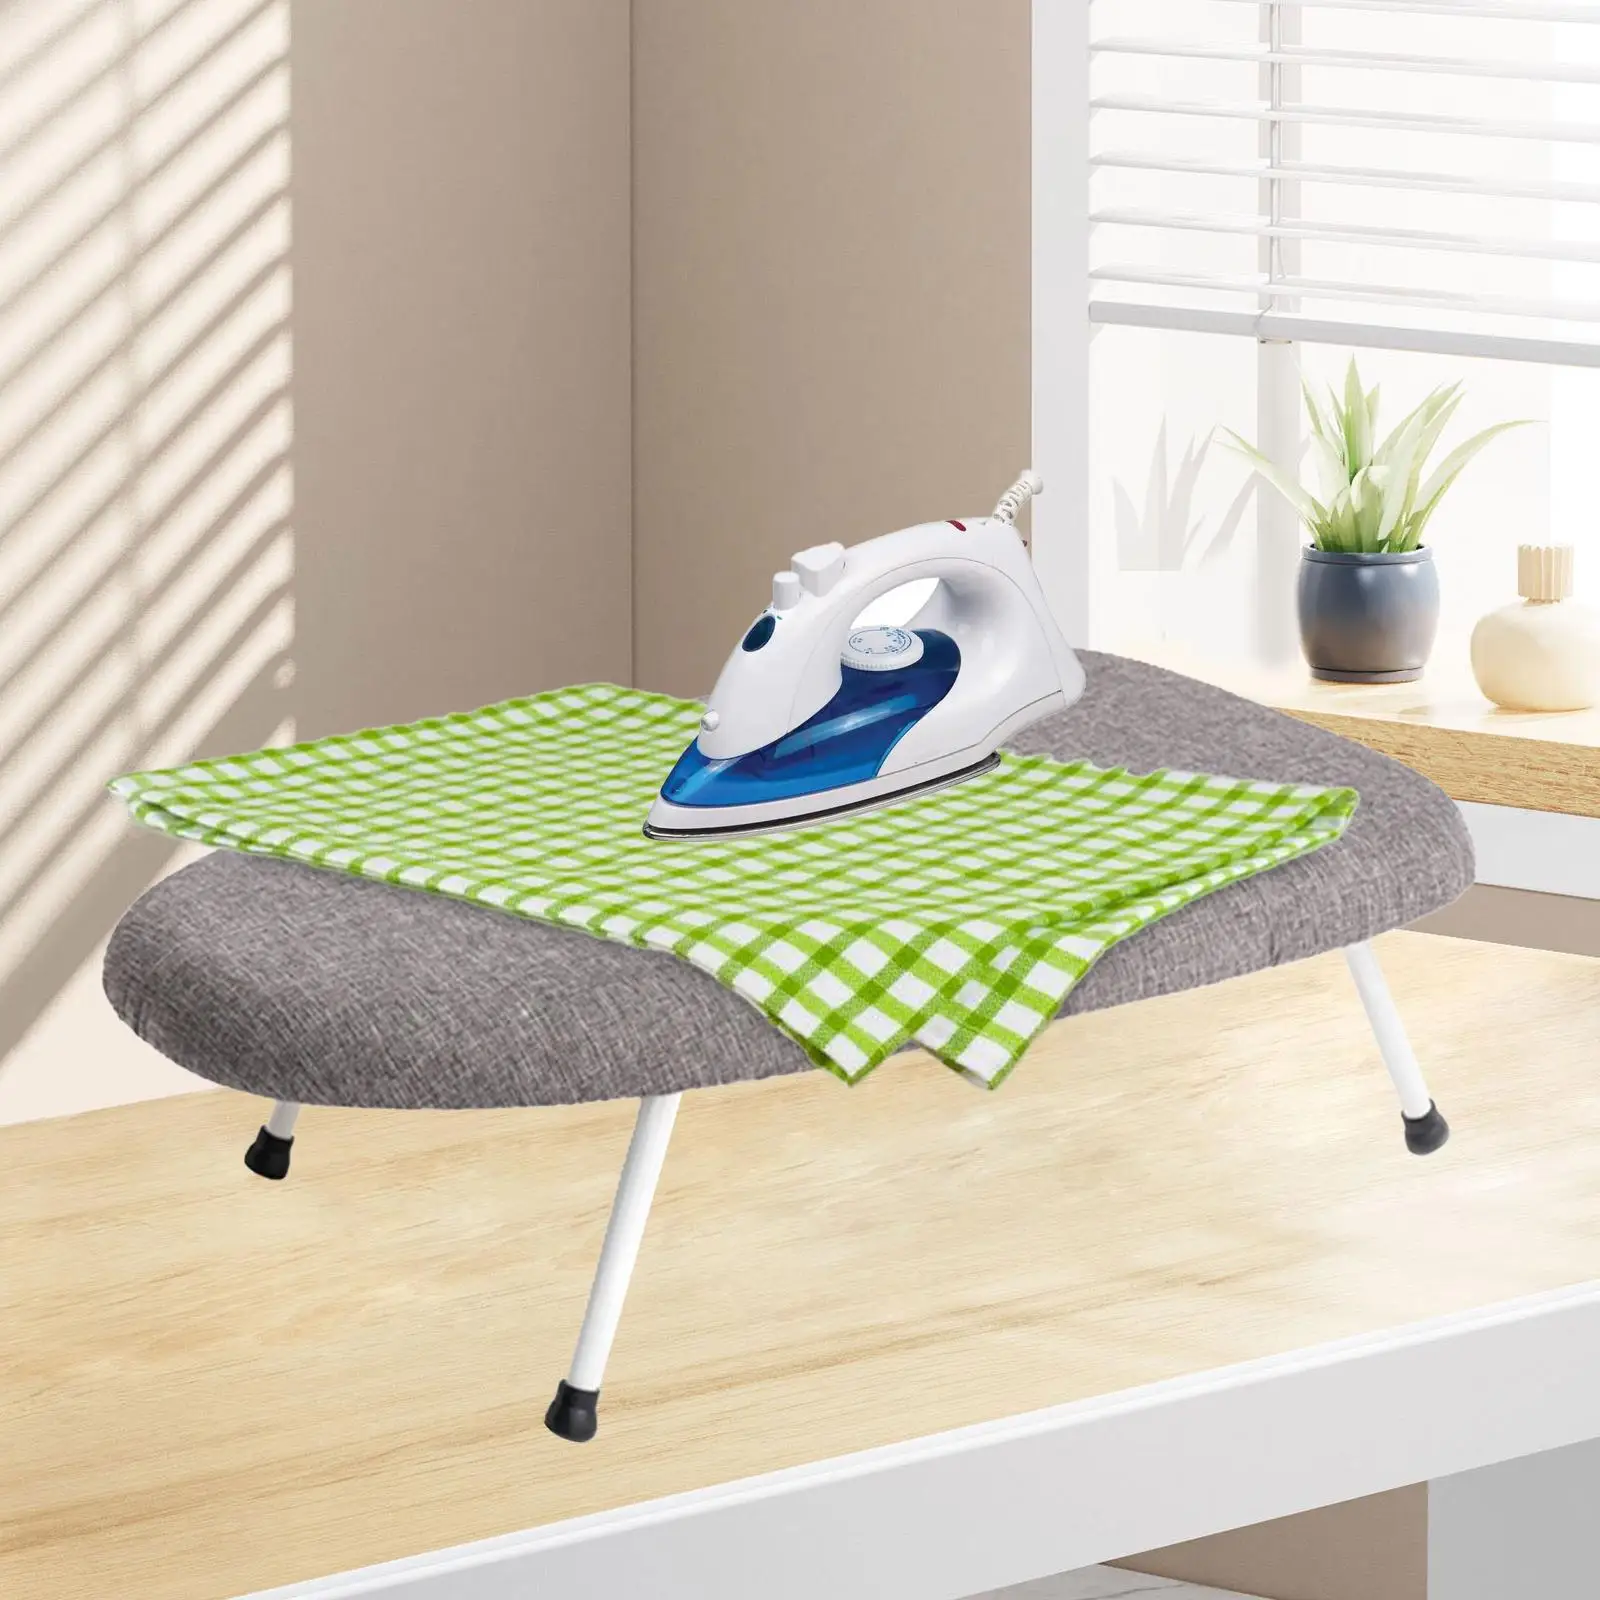 Mini Ironing Board Compact Heavy Duty Space Saving Small Iron Board Foldable for Laundry Room Dorm Apartment Sewing Room Sleeves